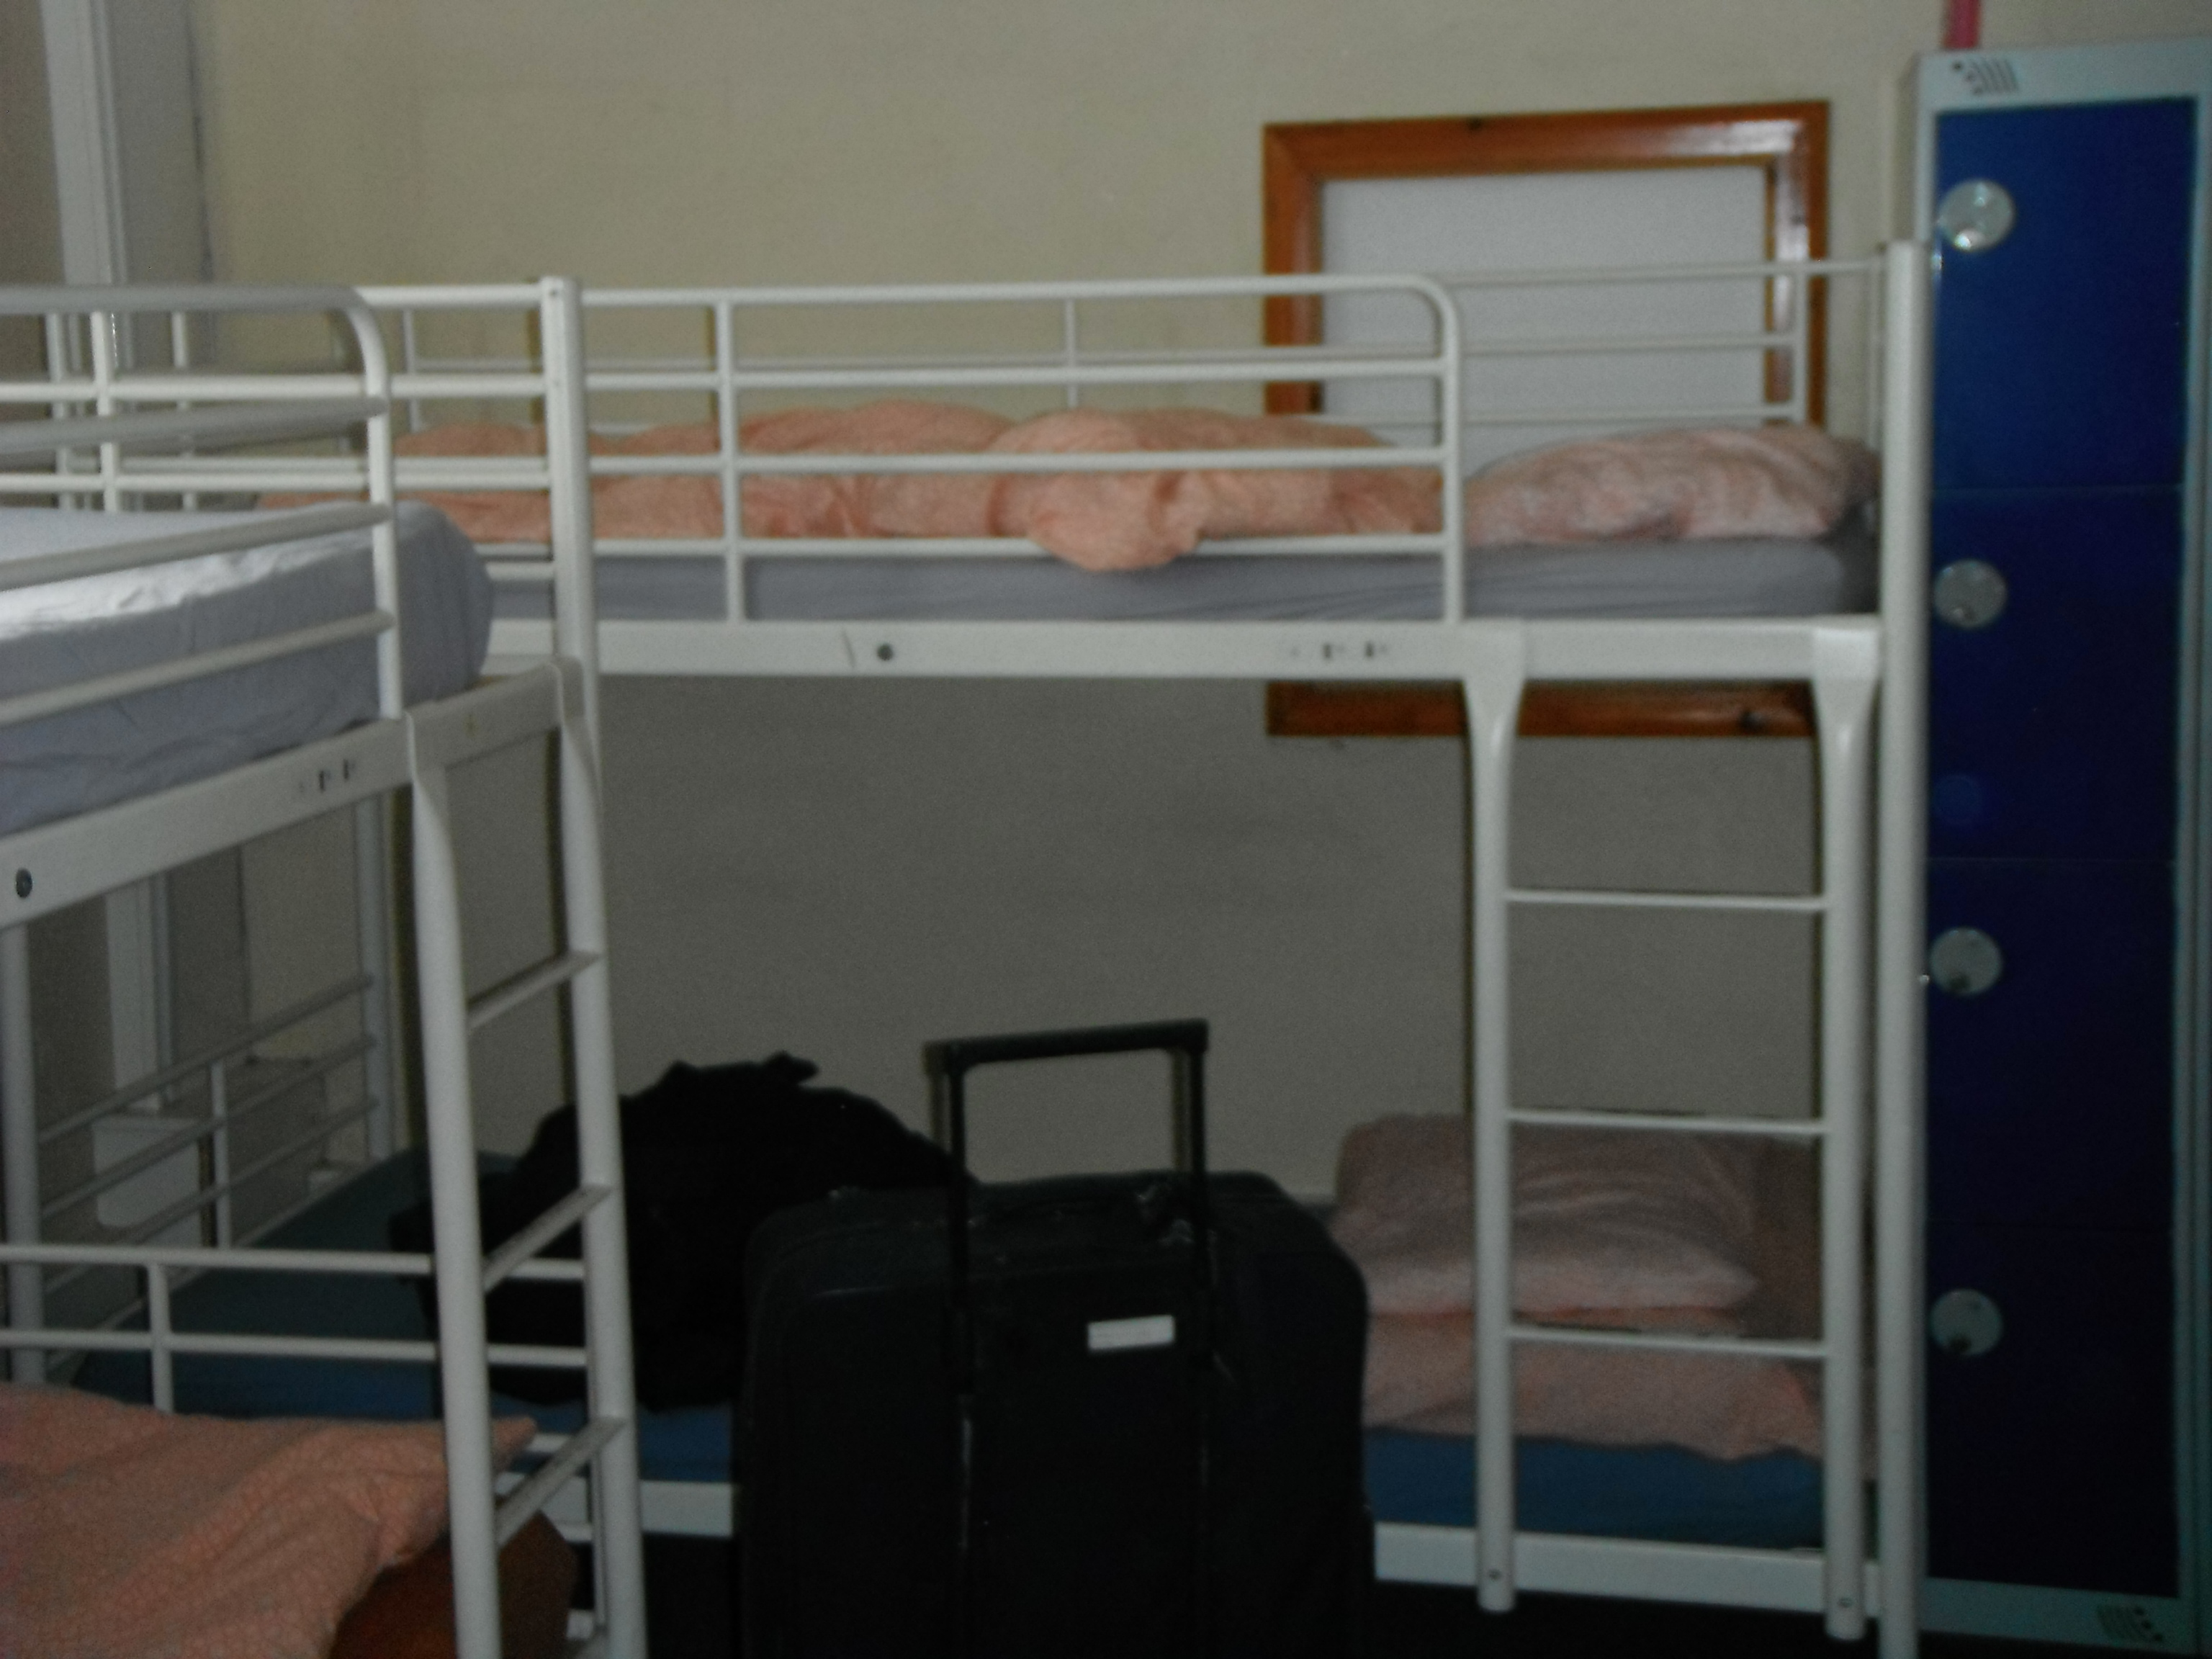  Photo taken by me – the bunks at the hostel in Birmingham, photographed while unoccupied. 